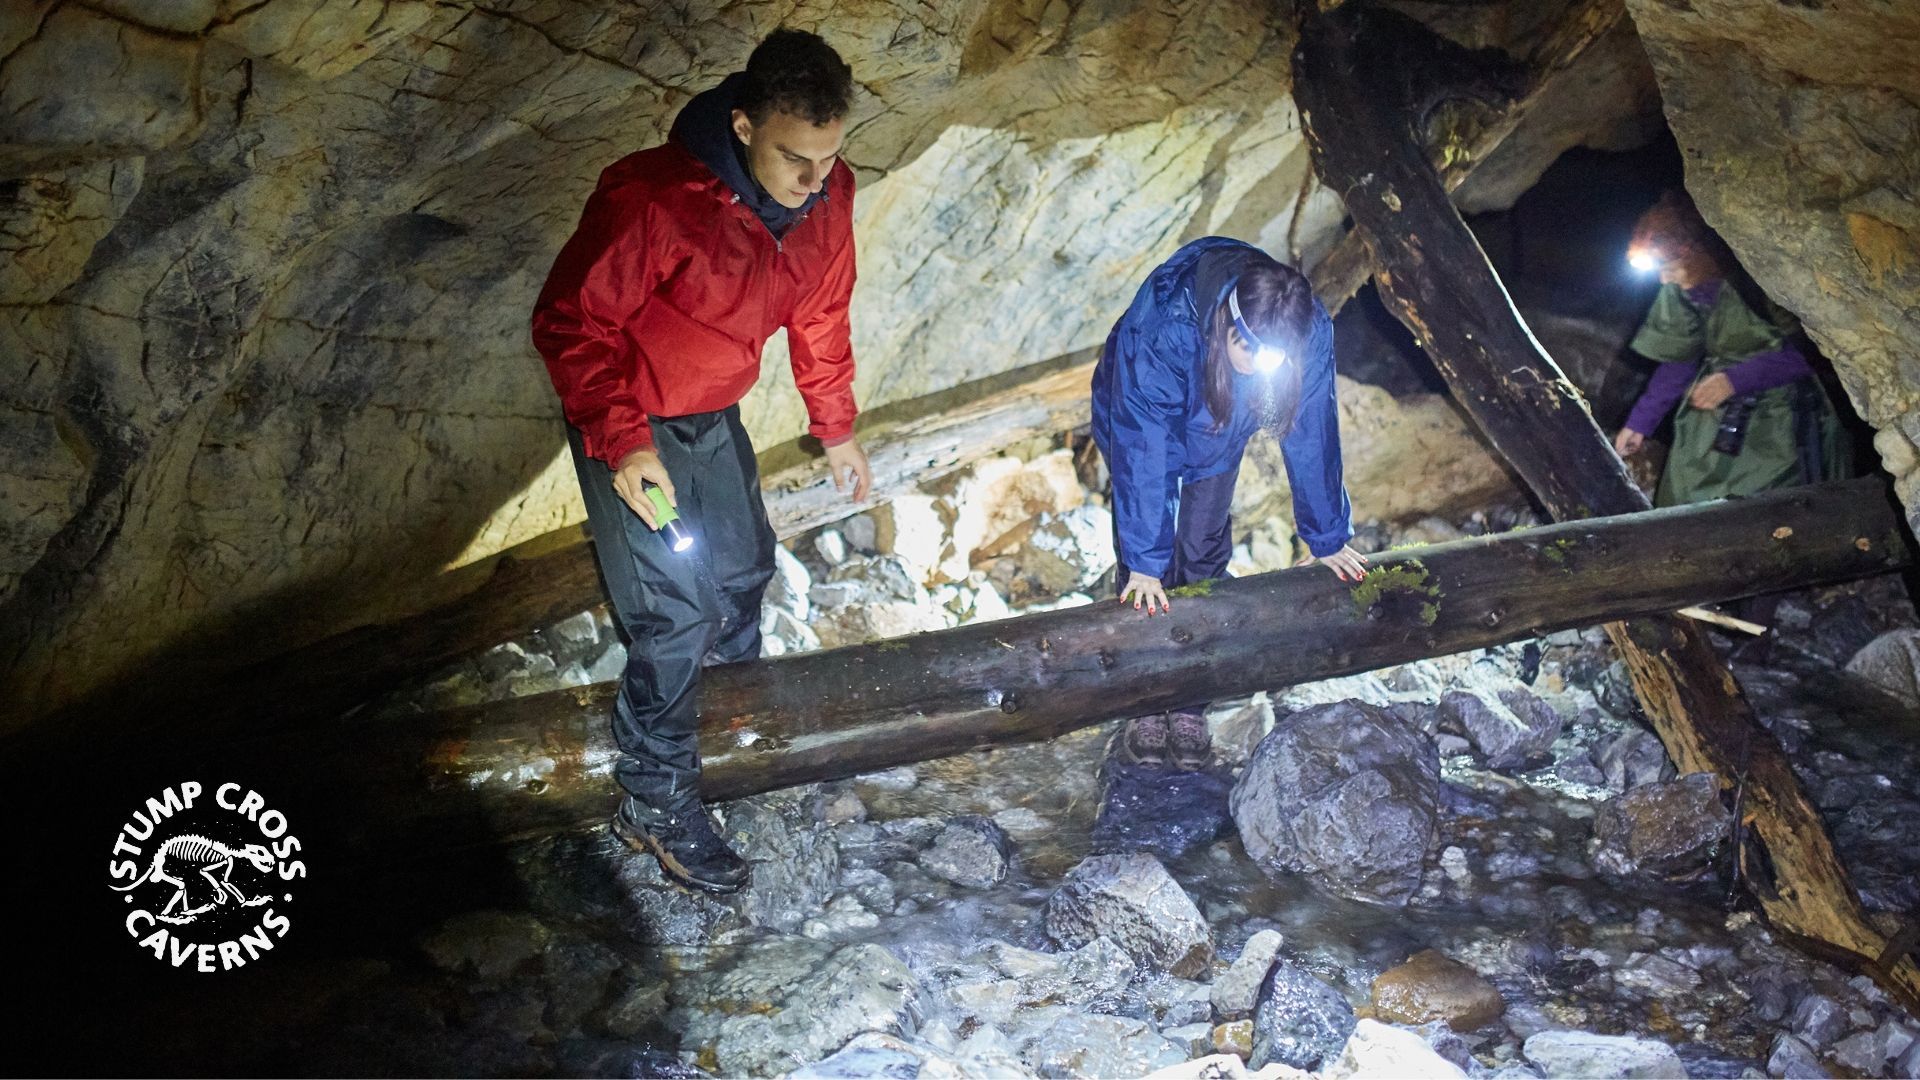 Got a passion for nature and a taste for adventure? A caving club might be for you. Learn more in our guide.
